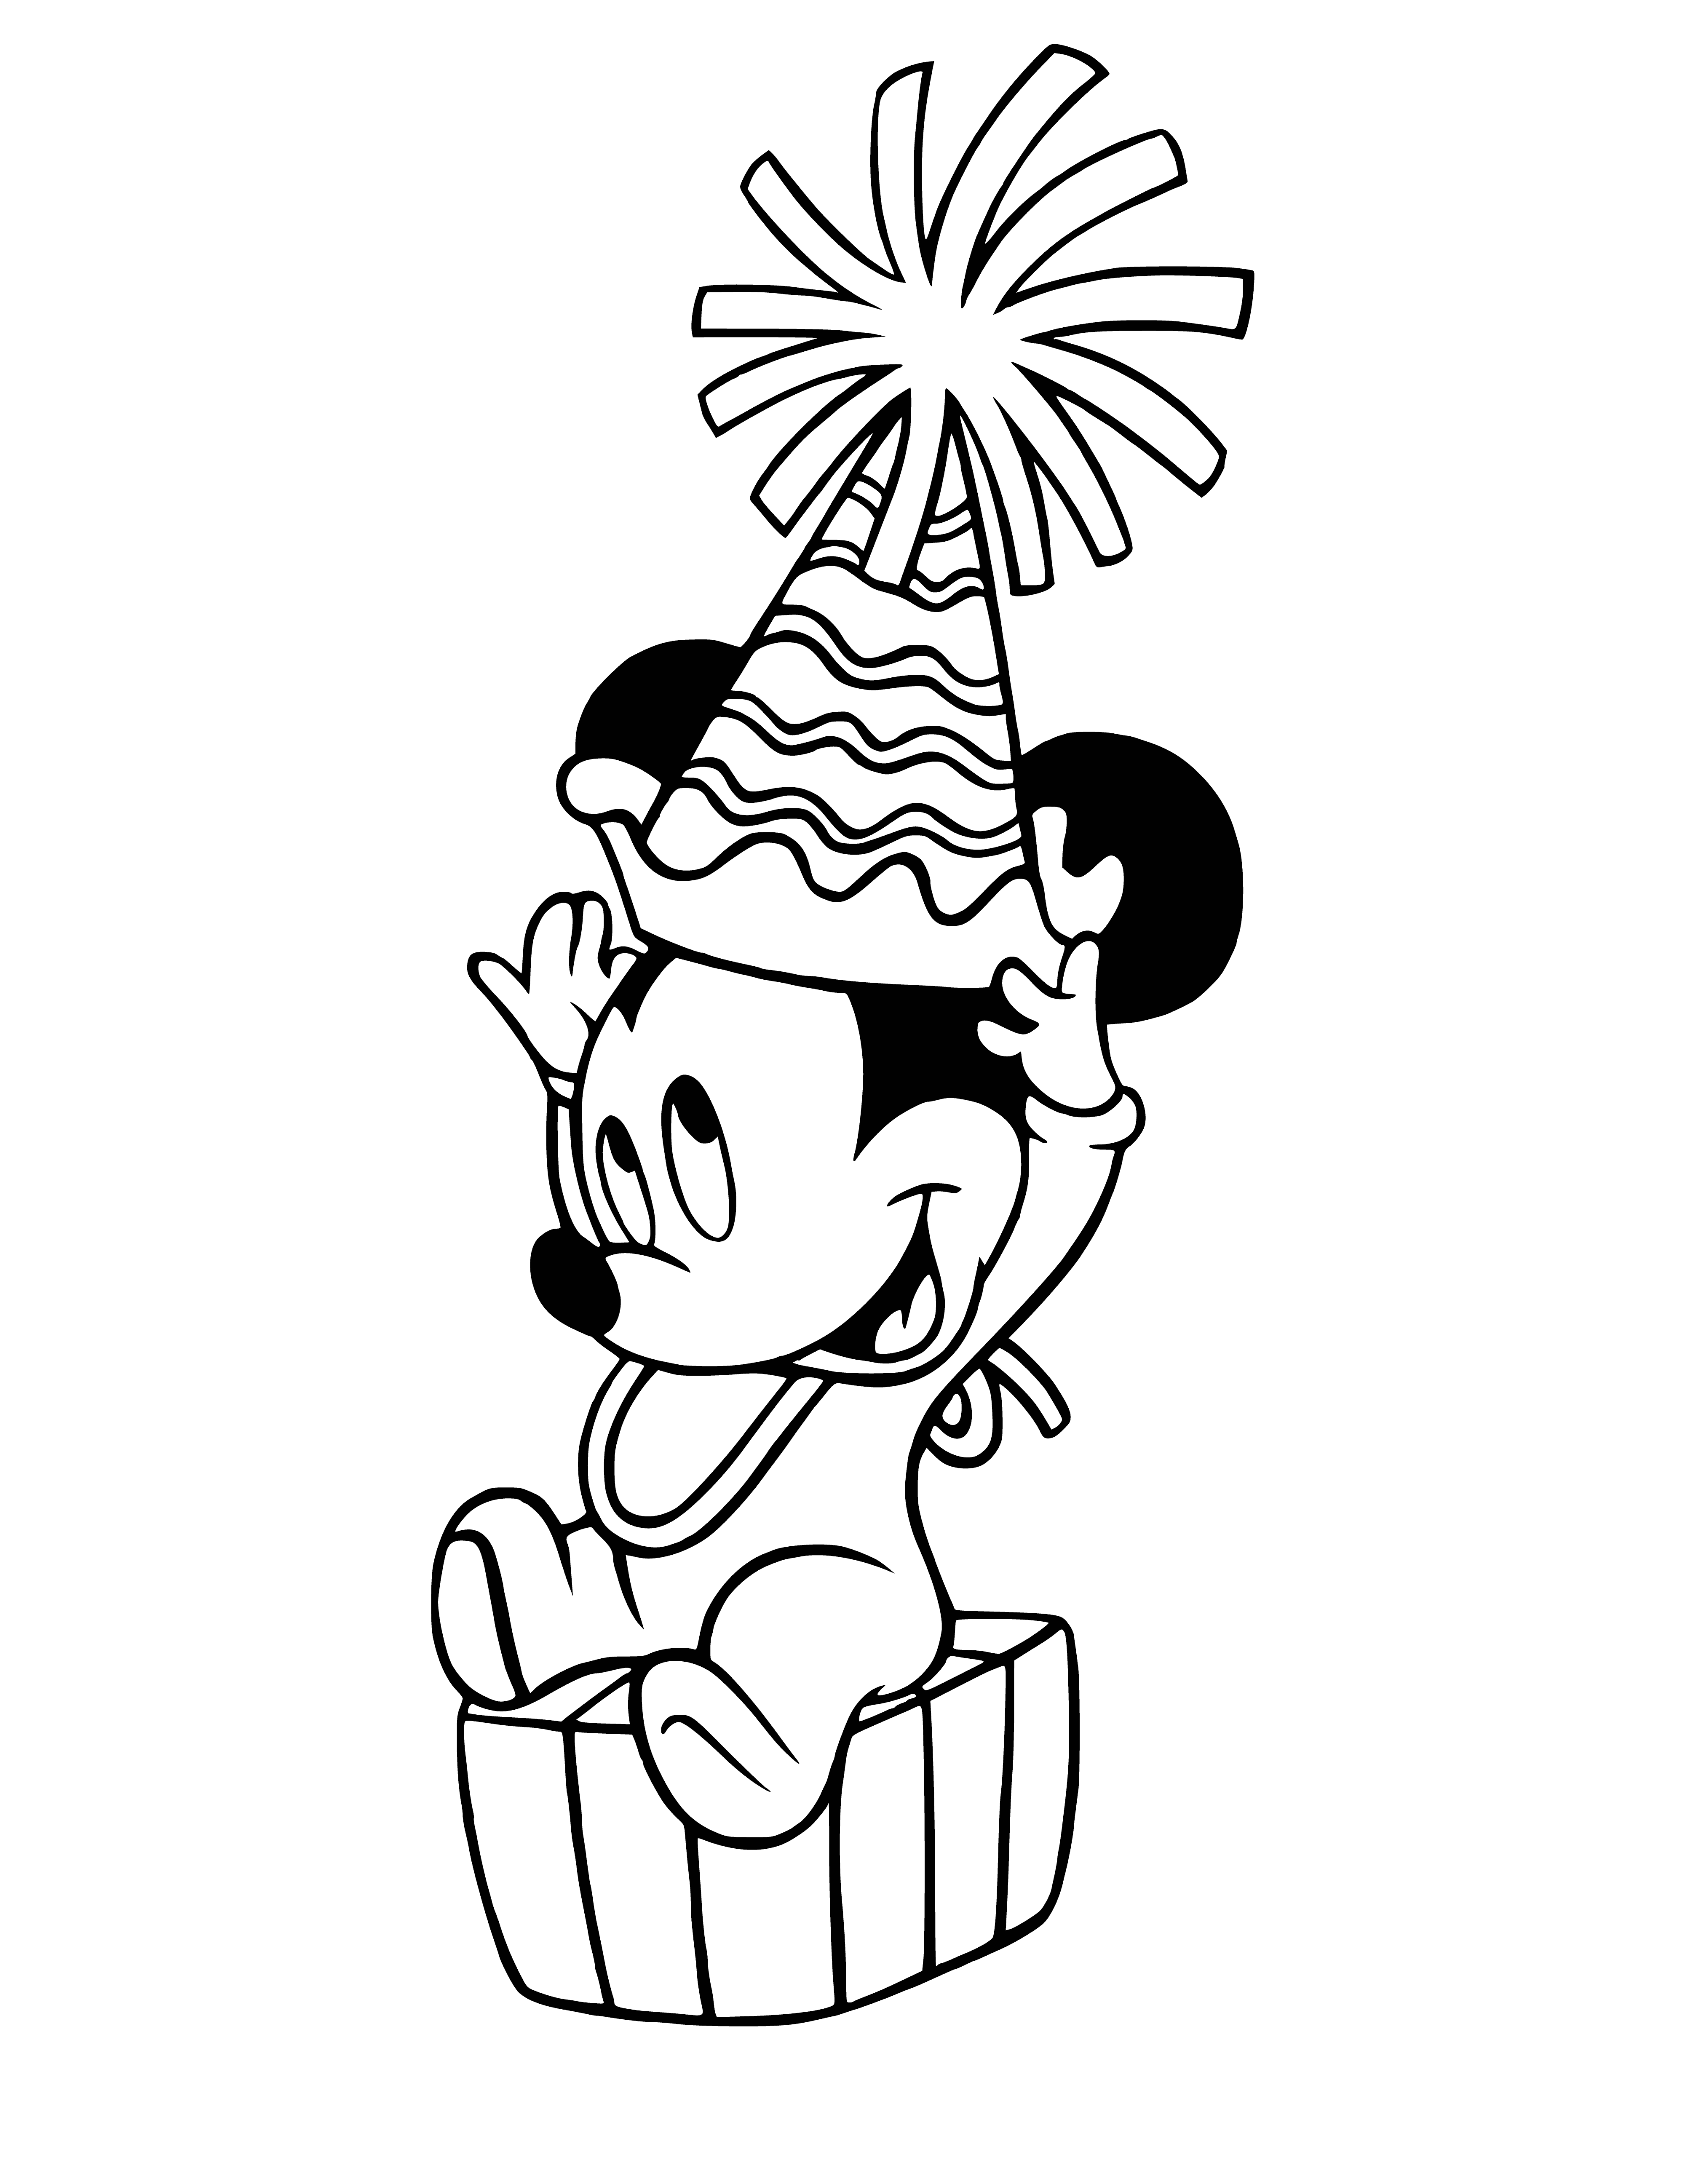 Mickey & friends celebrate New Year, wearing party hats & holding noisemakers. All very happy!